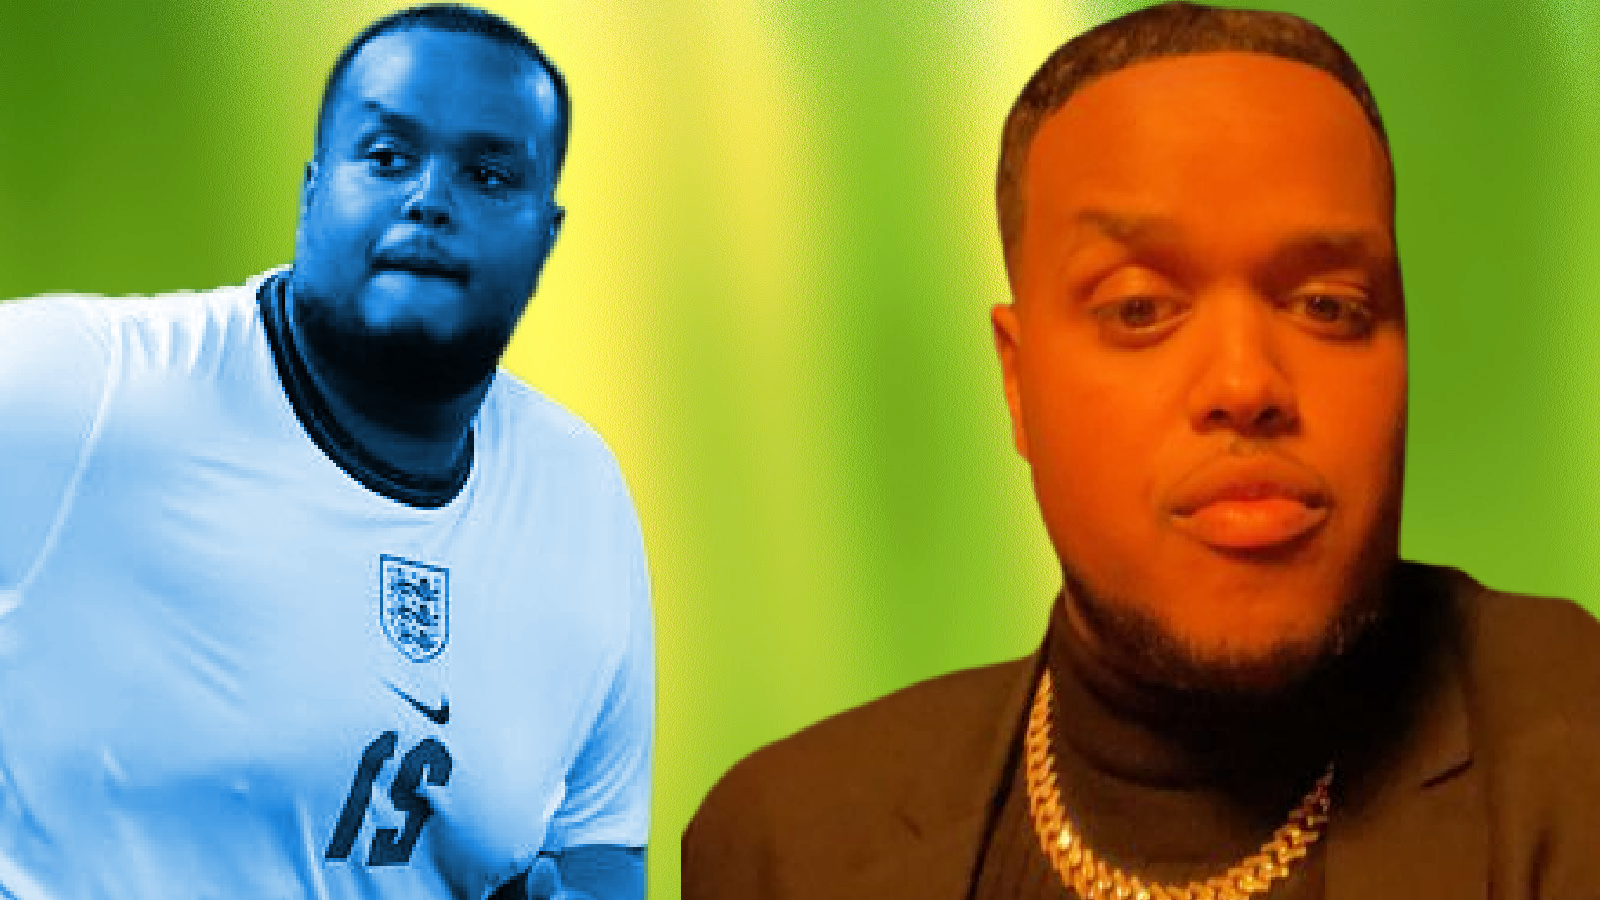 The incredible weight-loss transformation of YouTube star Chunkz